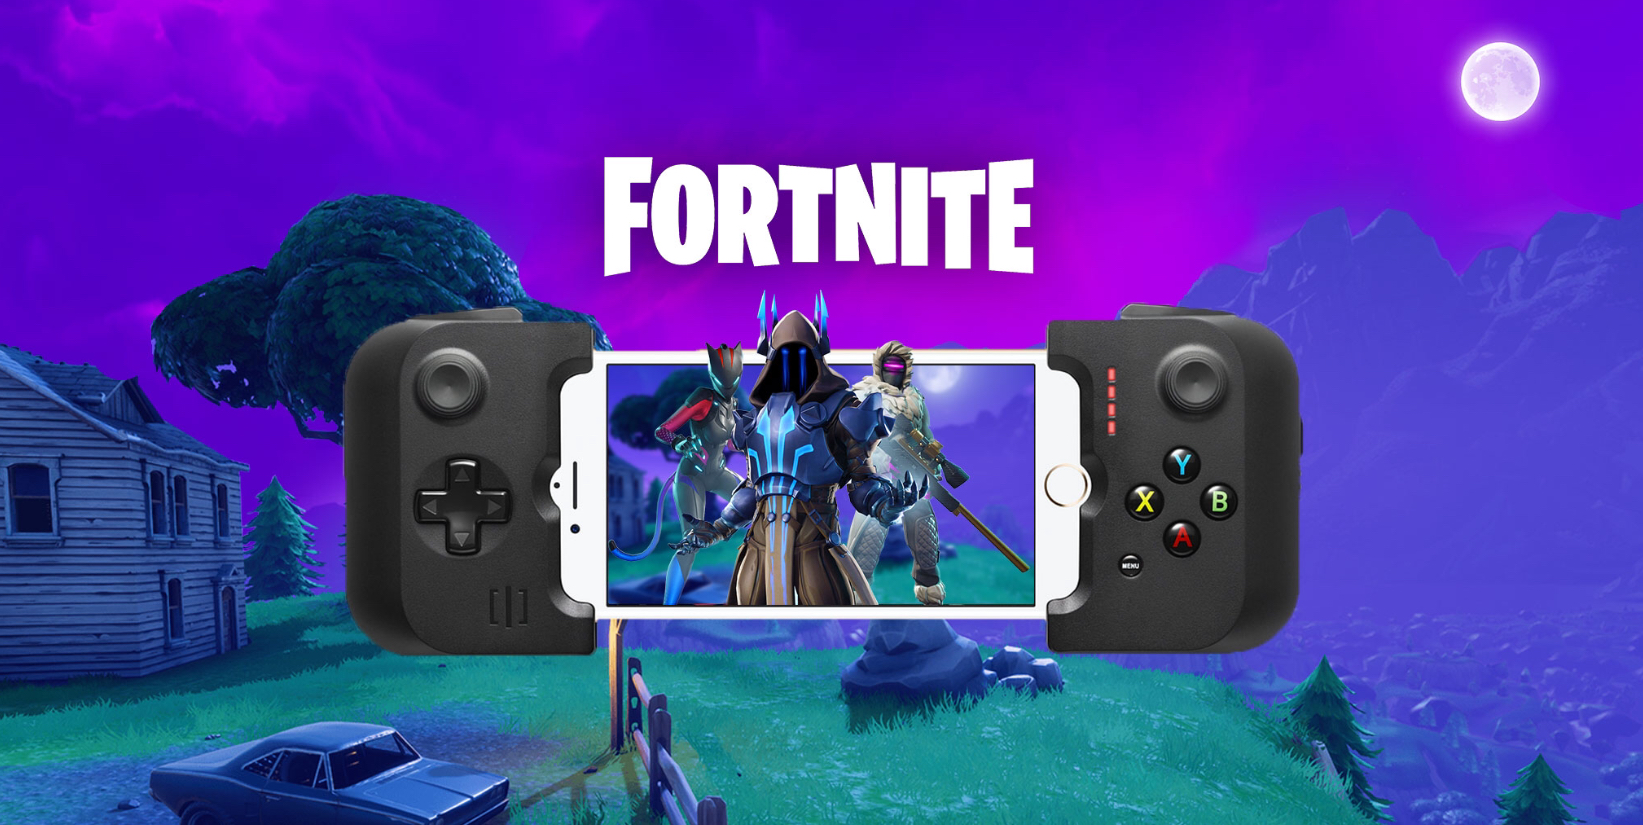 Controller Matchmaking Fortnite Pc Fortnite Mobile Controller Matchmaking And Customisation Detailed Thanks To Gamevice As Of Patch 7 30 Toucharcade